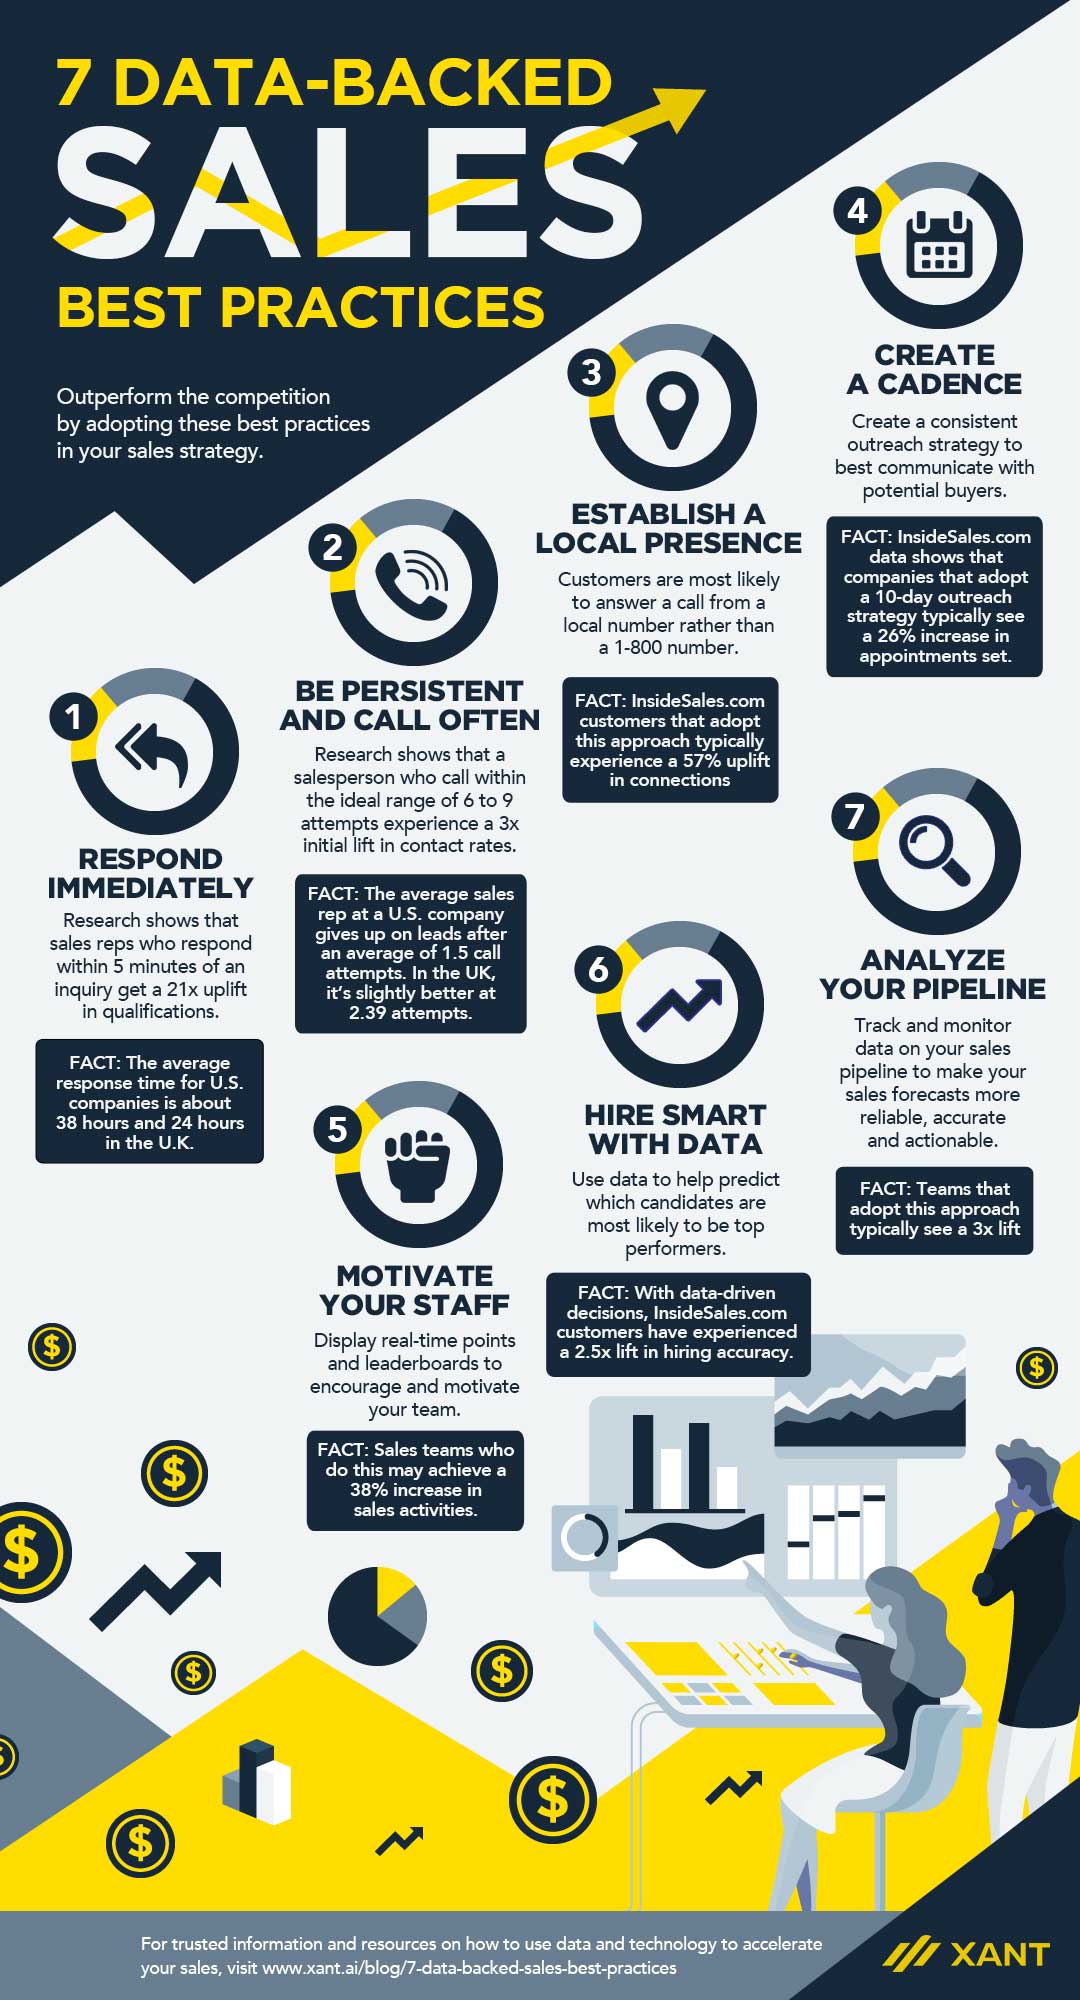 Data-Backed Sales Best Practices [INFOGRAPHIC]